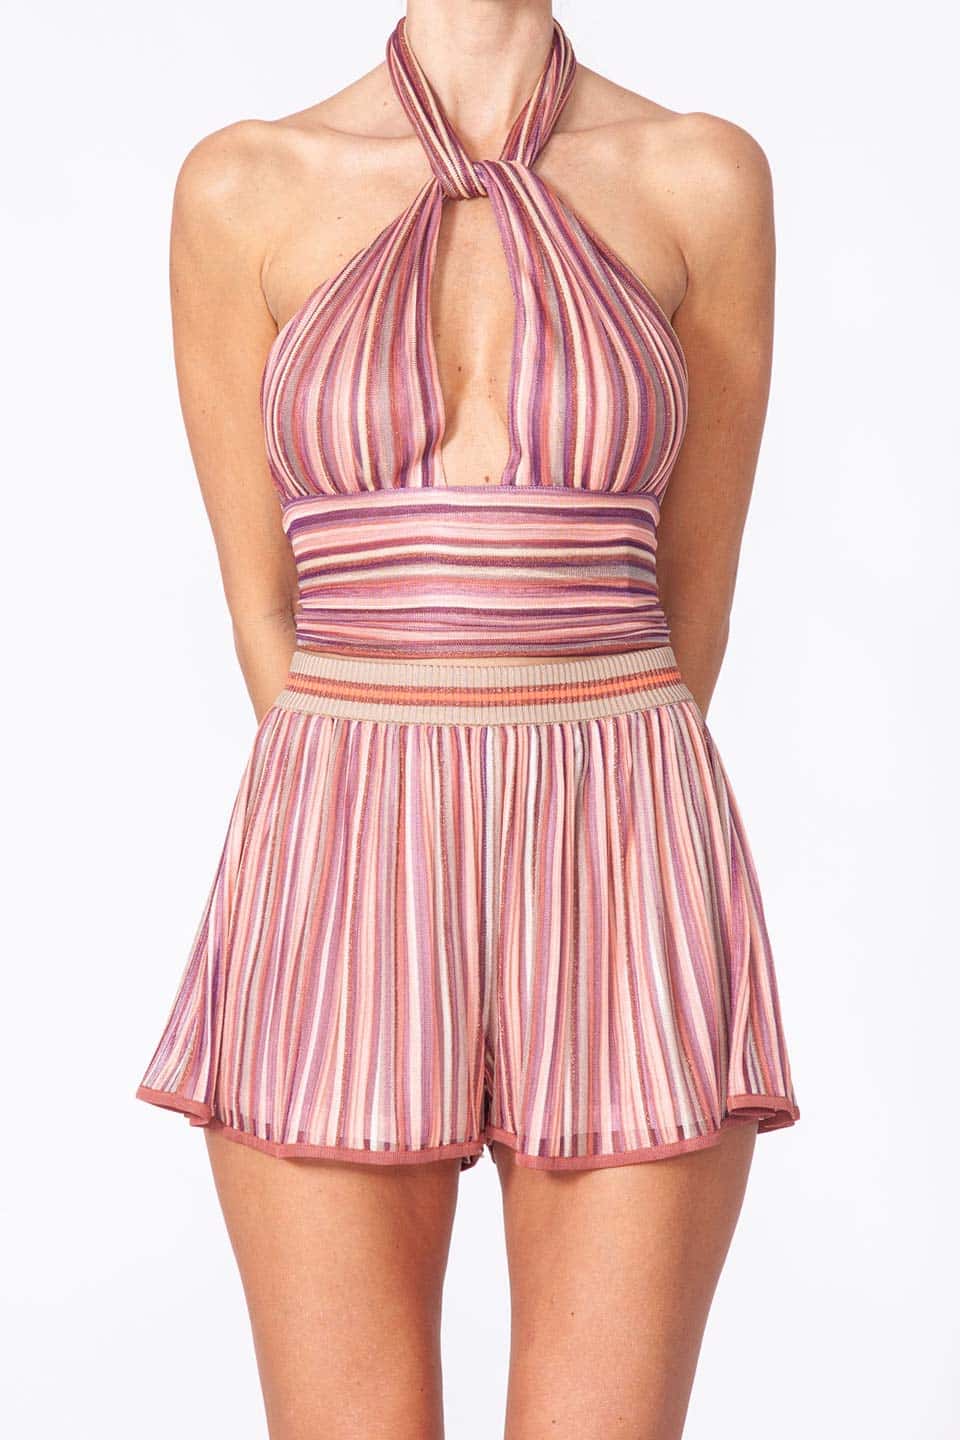 Thumbnail for Product gallery 3, Fashion designer halter top in pink color front product view